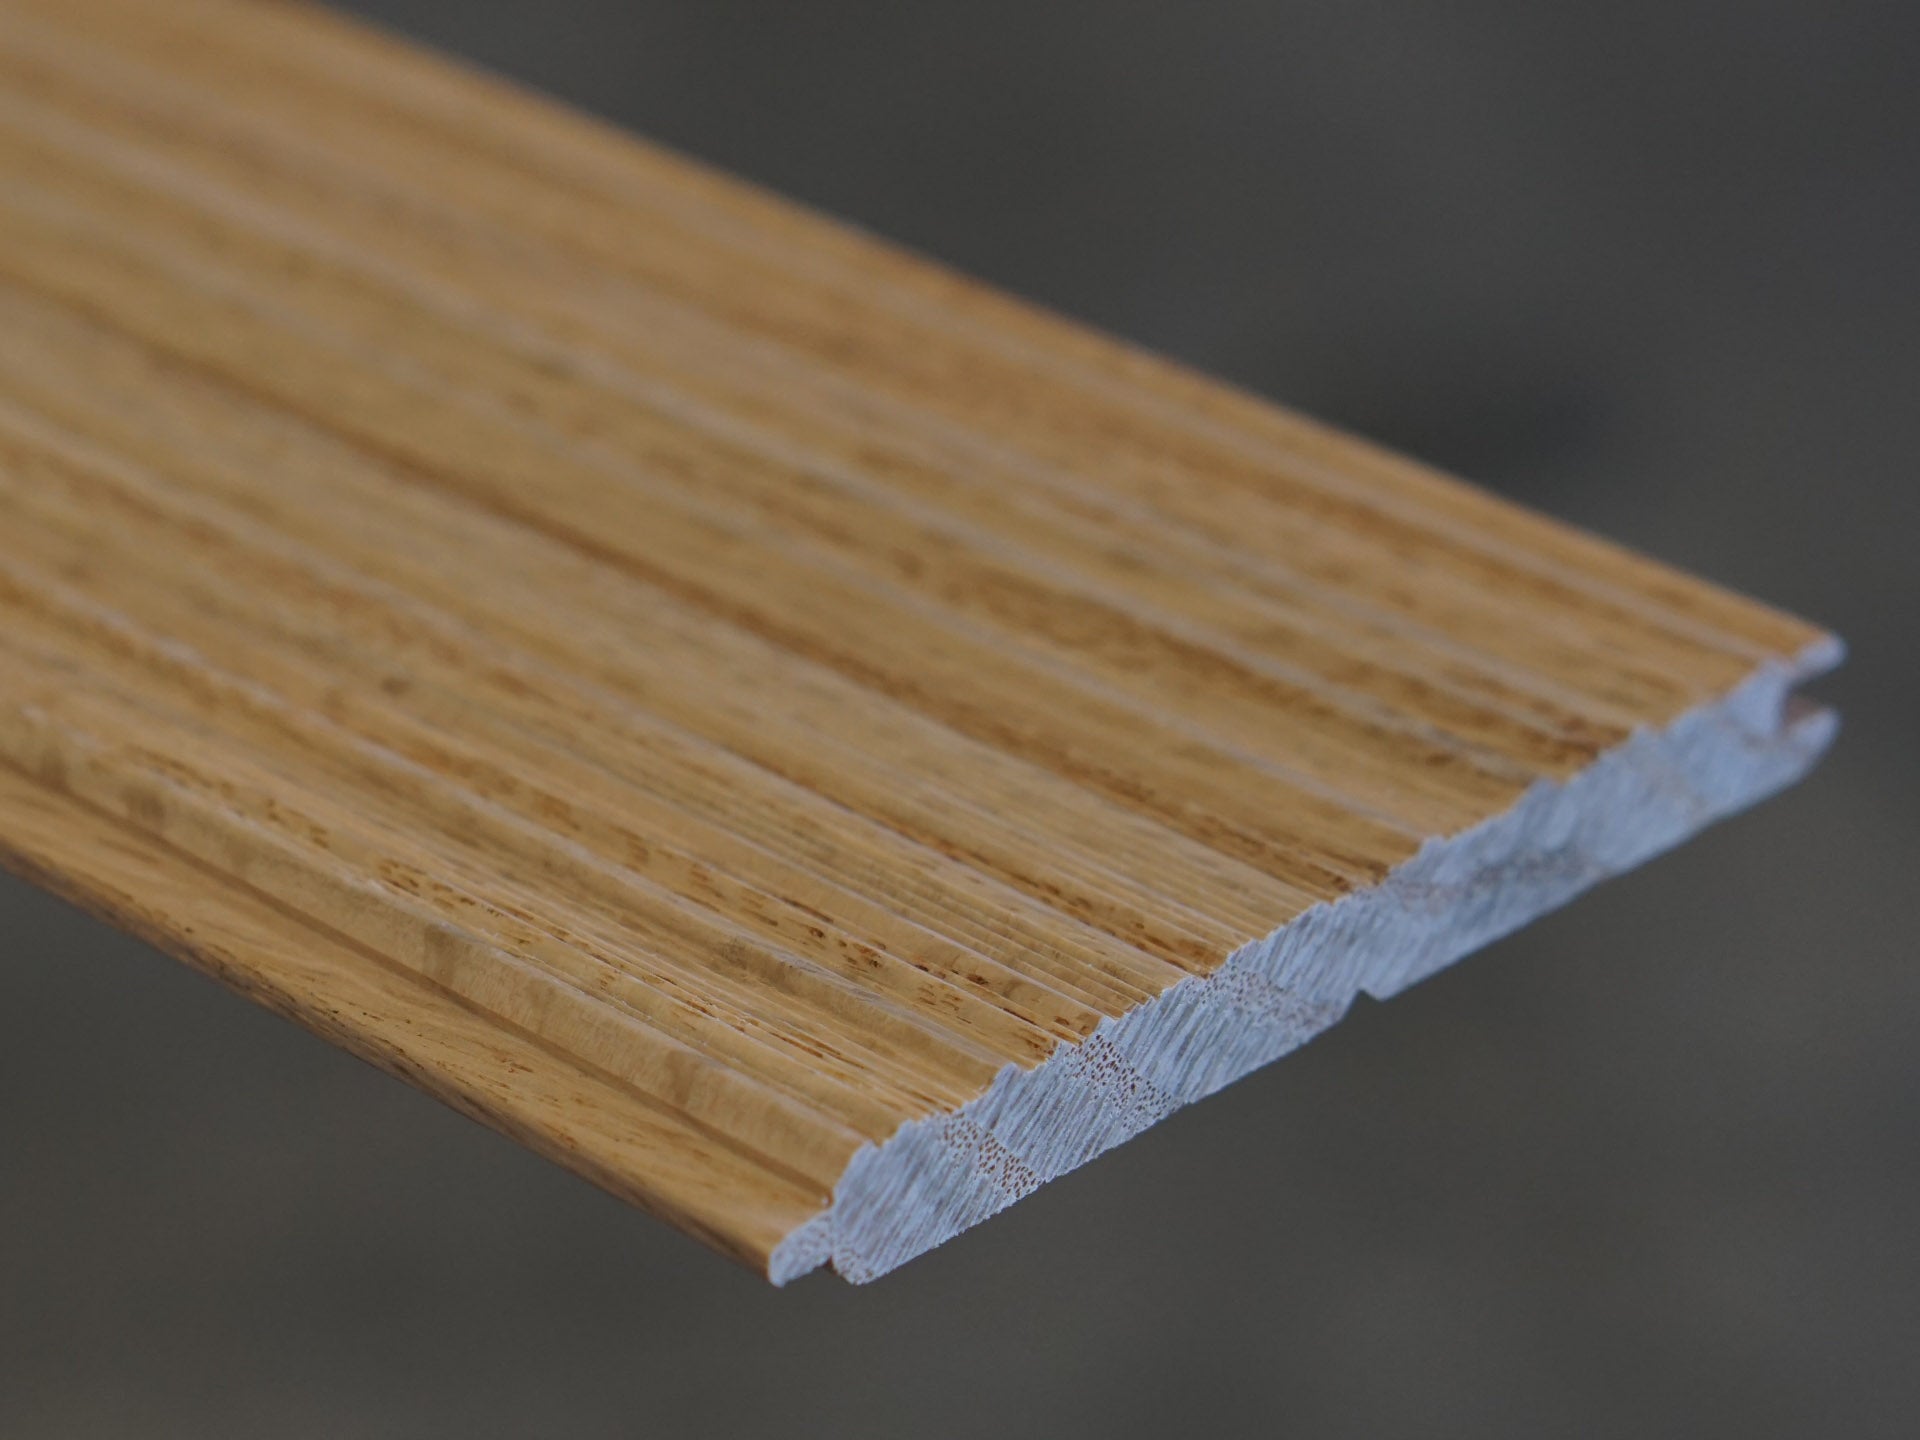 Close up of Weldtex tongue & groove red oak hardwood plank consisting of a combed, striated, brushed wood appearance common in mid-century modern homes and design